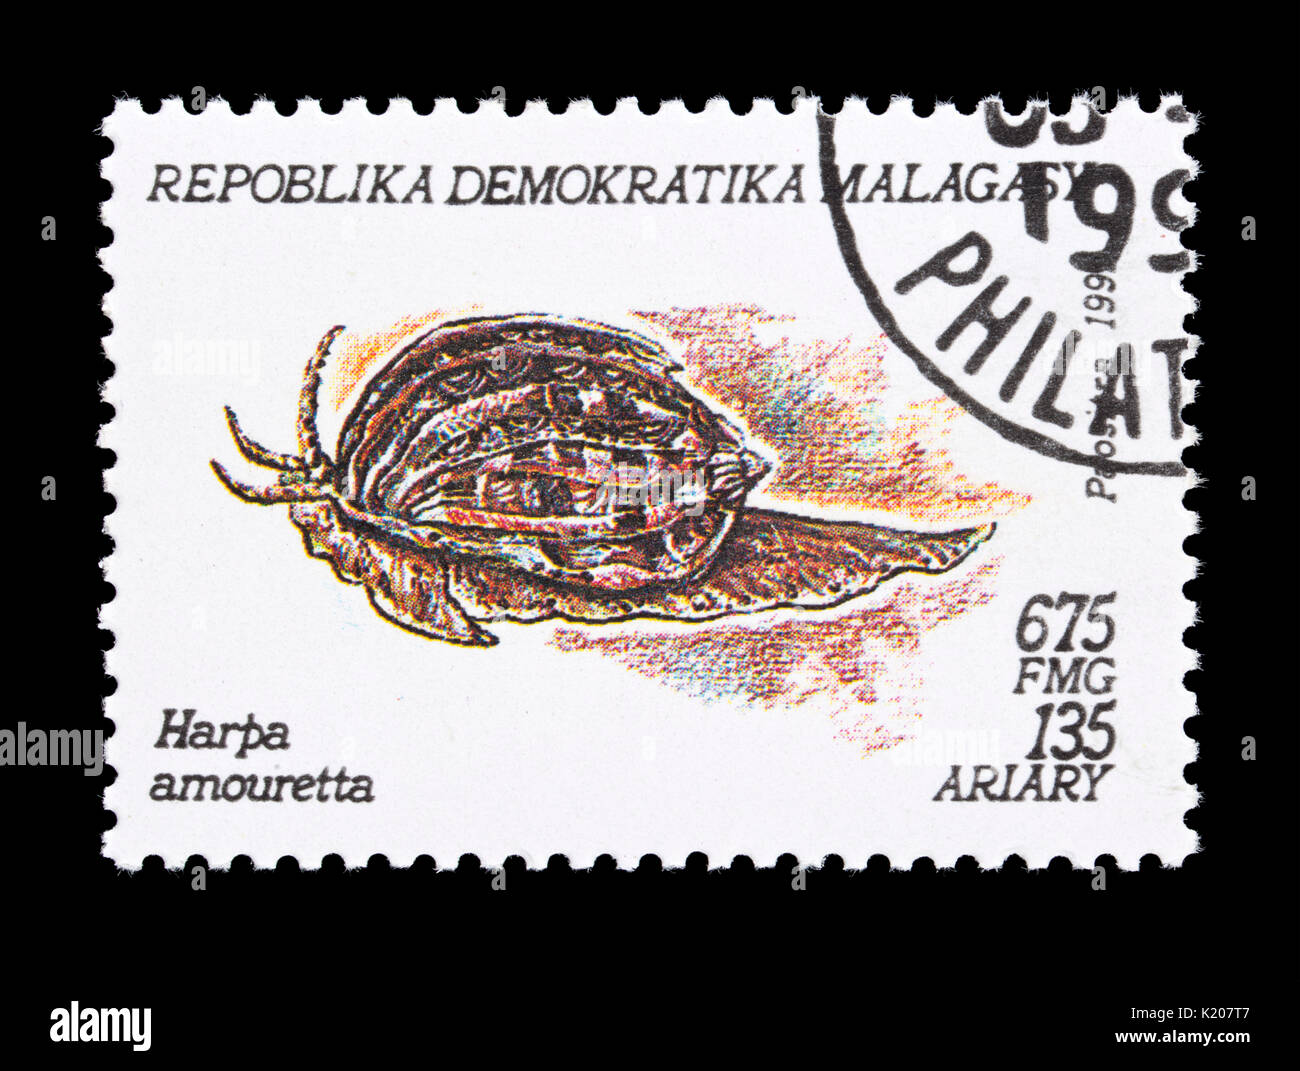 Postage stamp from Madagascar depicting (Harpa amouretta) Stock Photo